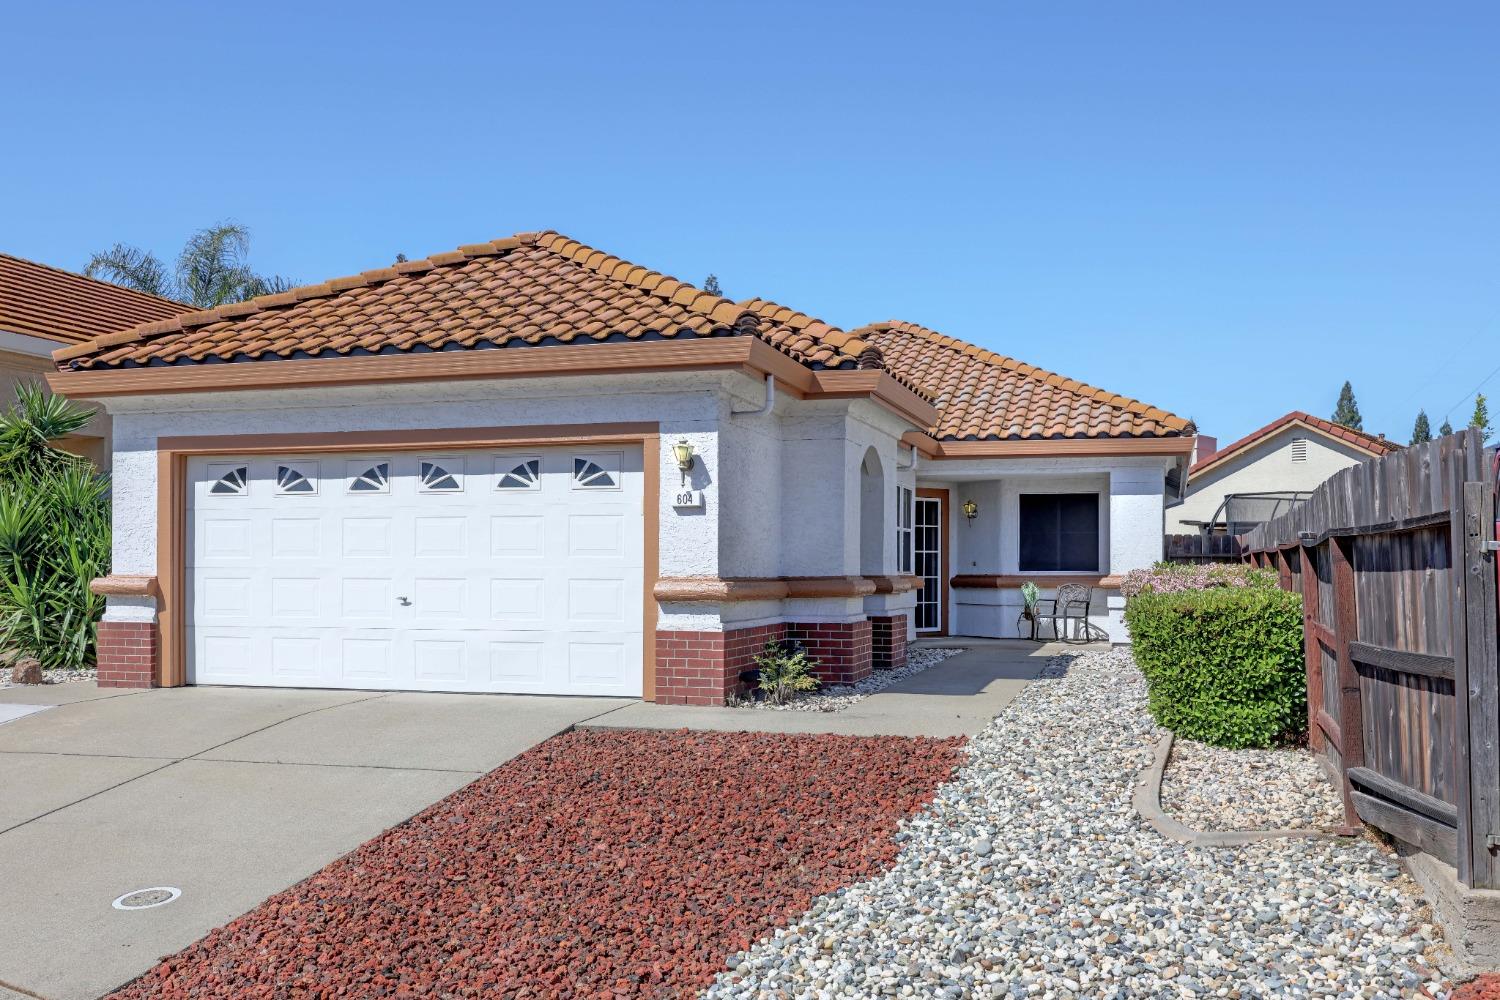 Photo of 604 Rigby Ct in Roseville, CA